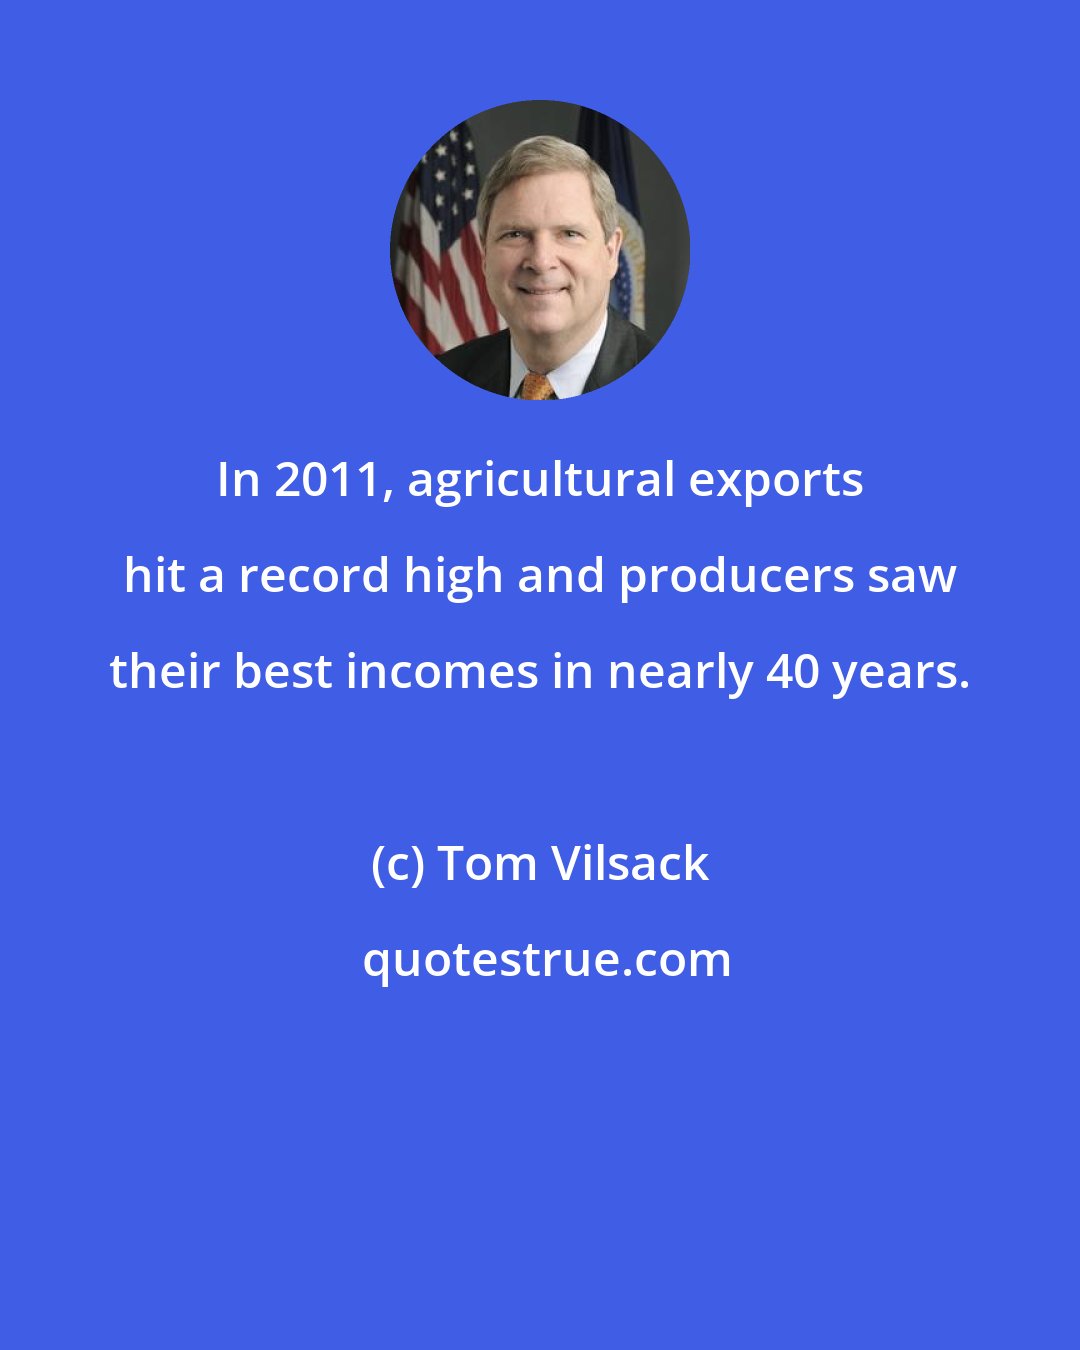 Tom Vilsack: In 2011, agricultural exports hit a record high and producers saw their best incomes in nearly 40 years.